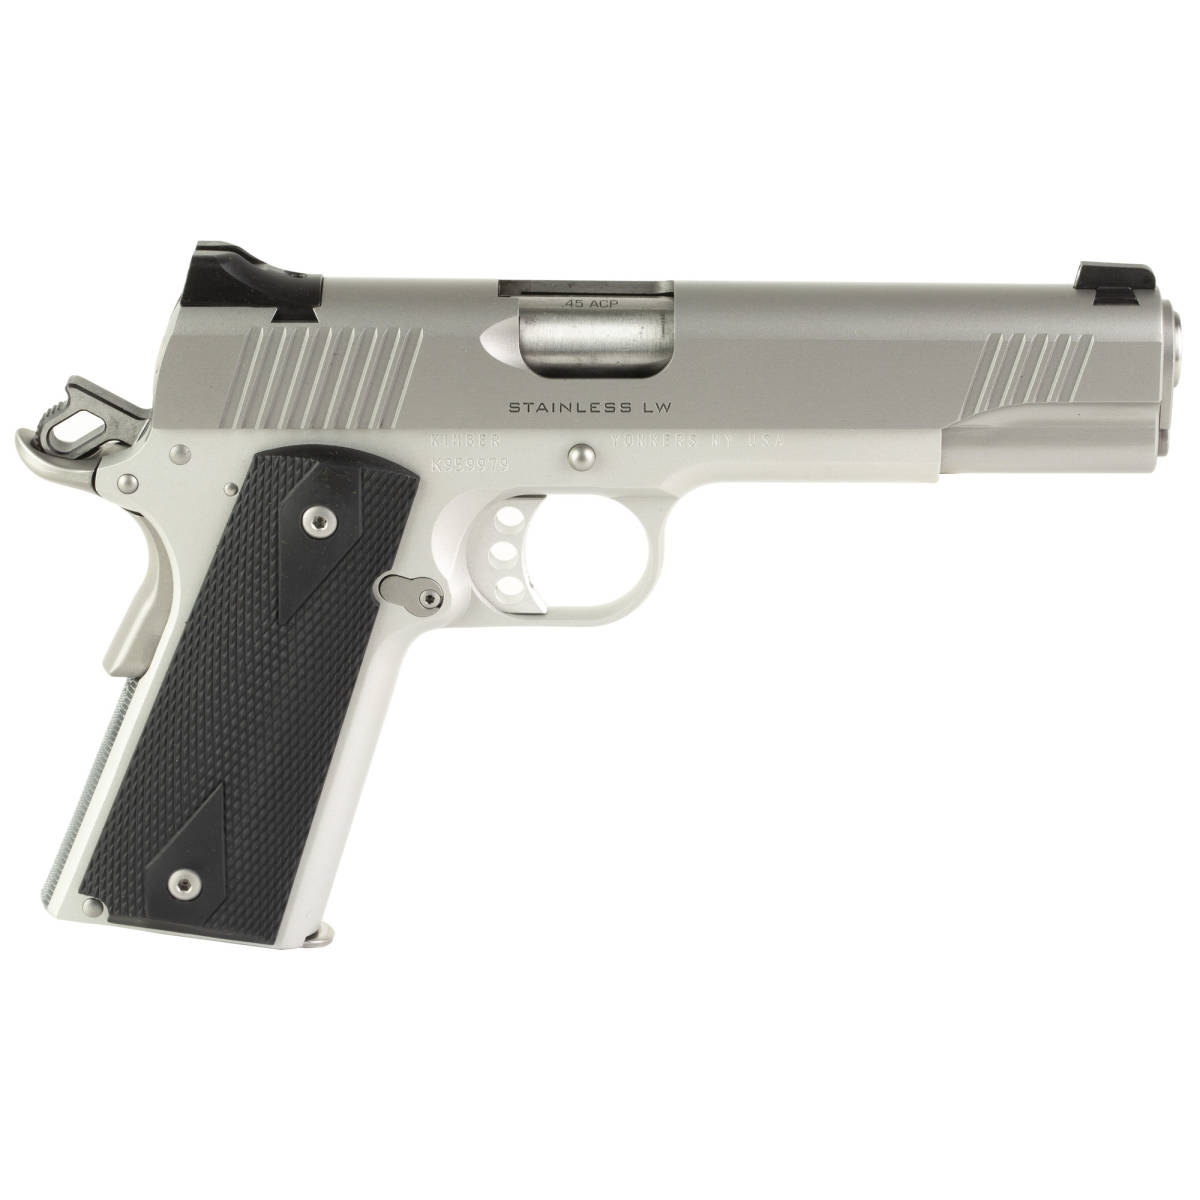 KIMBER STAINLESS LW 45ACP 5” 7RD OR-img-1